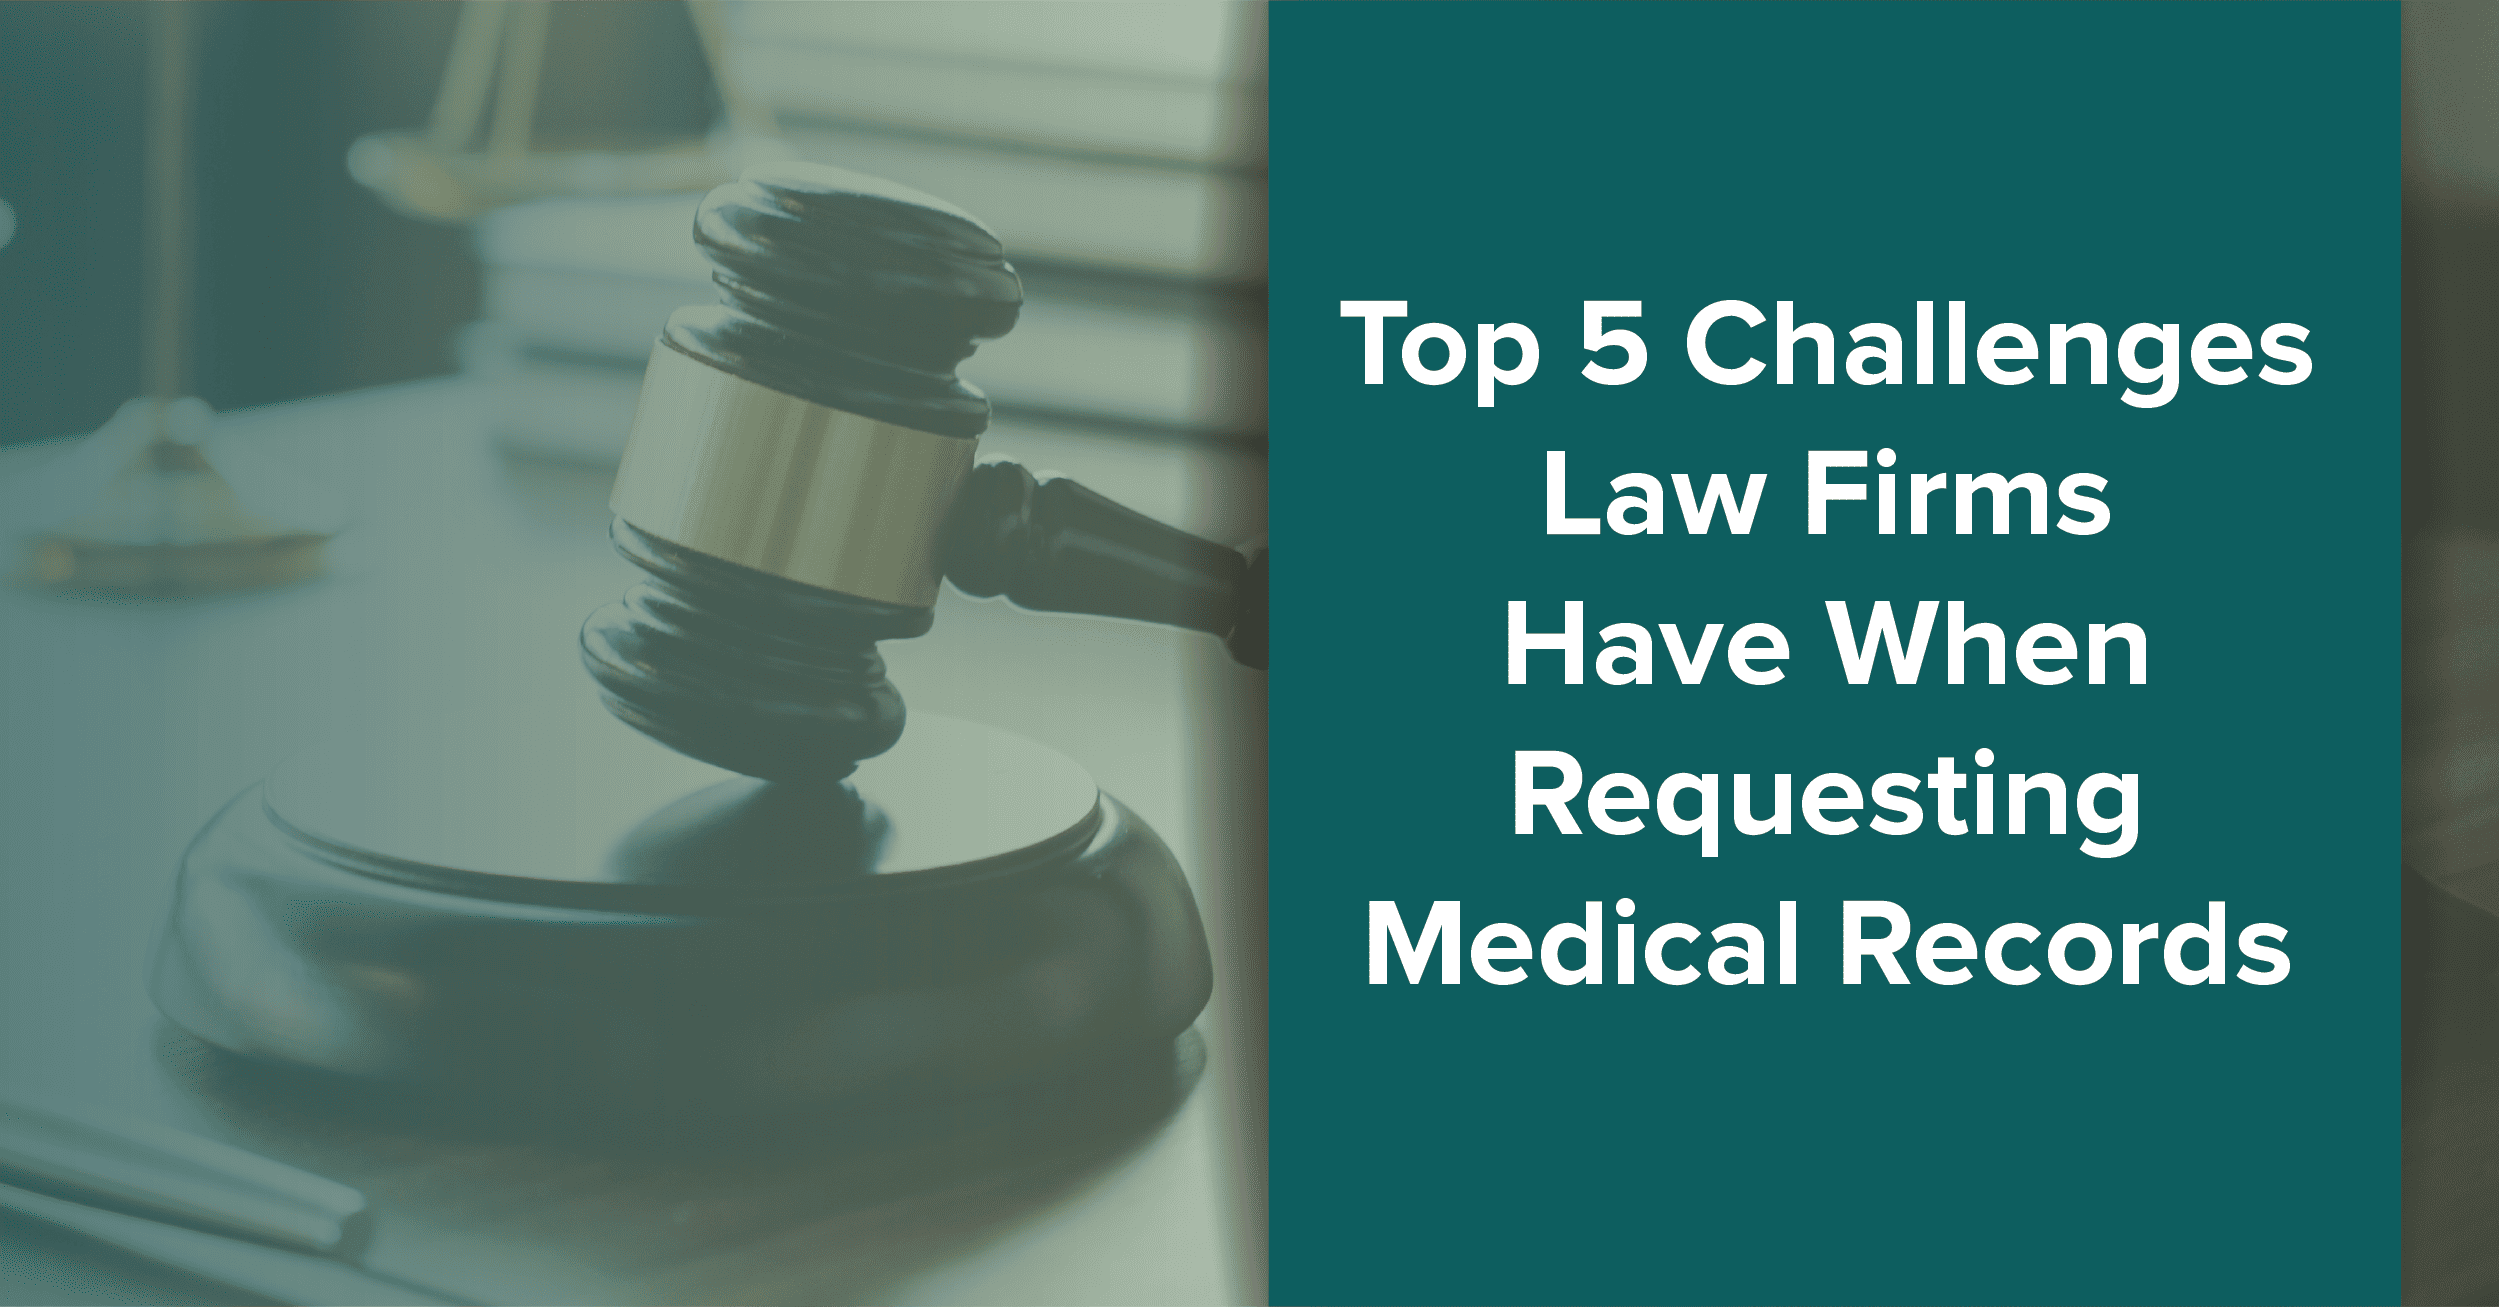 Top 5 Challenges Law Firms Have When Acquiring Medical Health Records